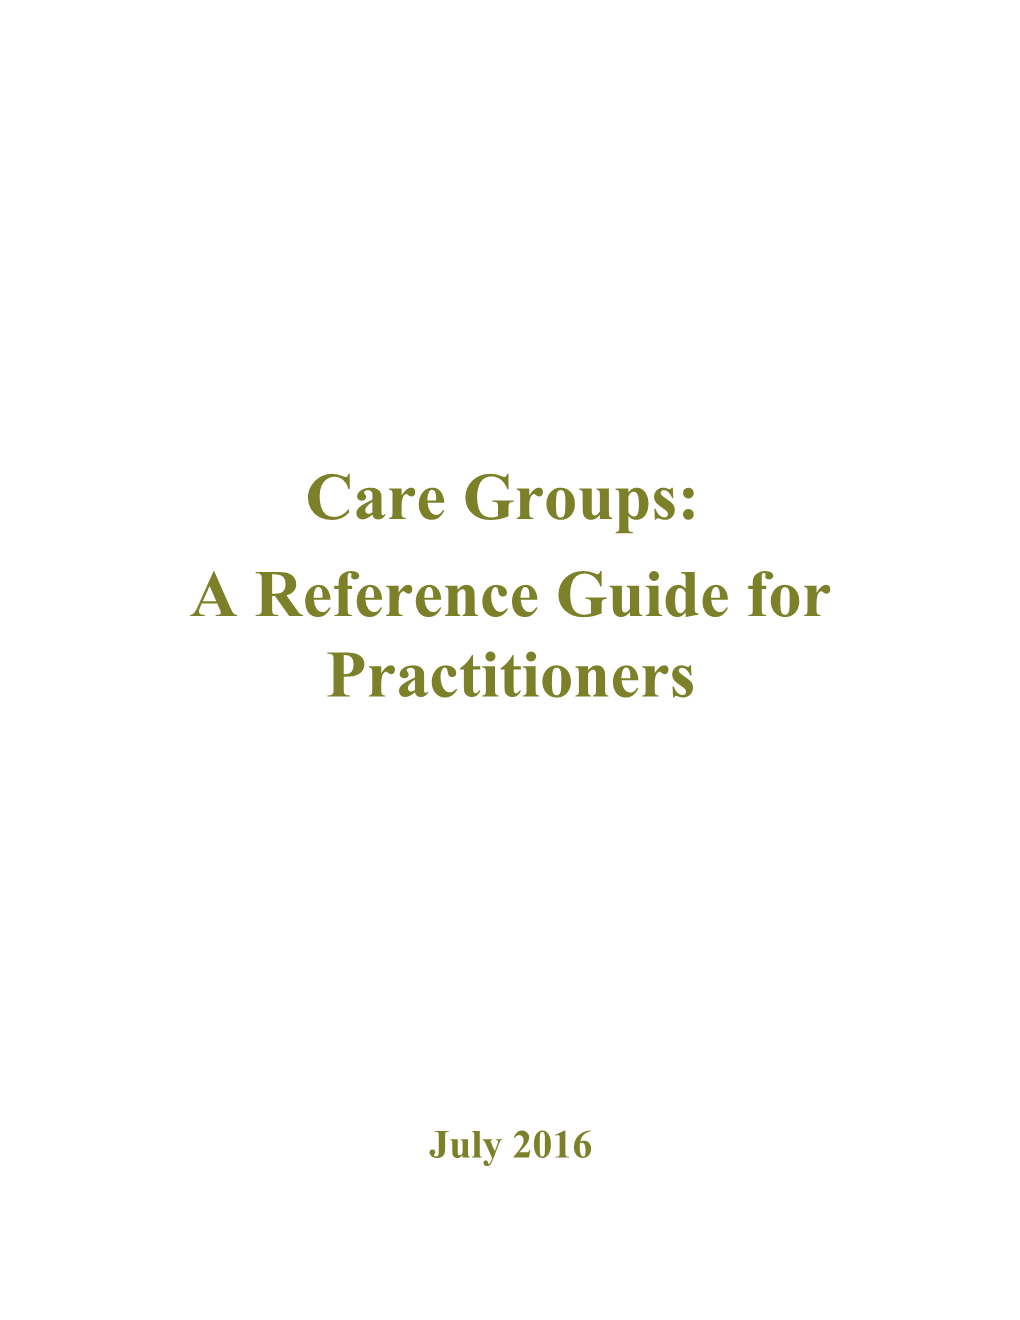 A Reference Guide for Practitioners